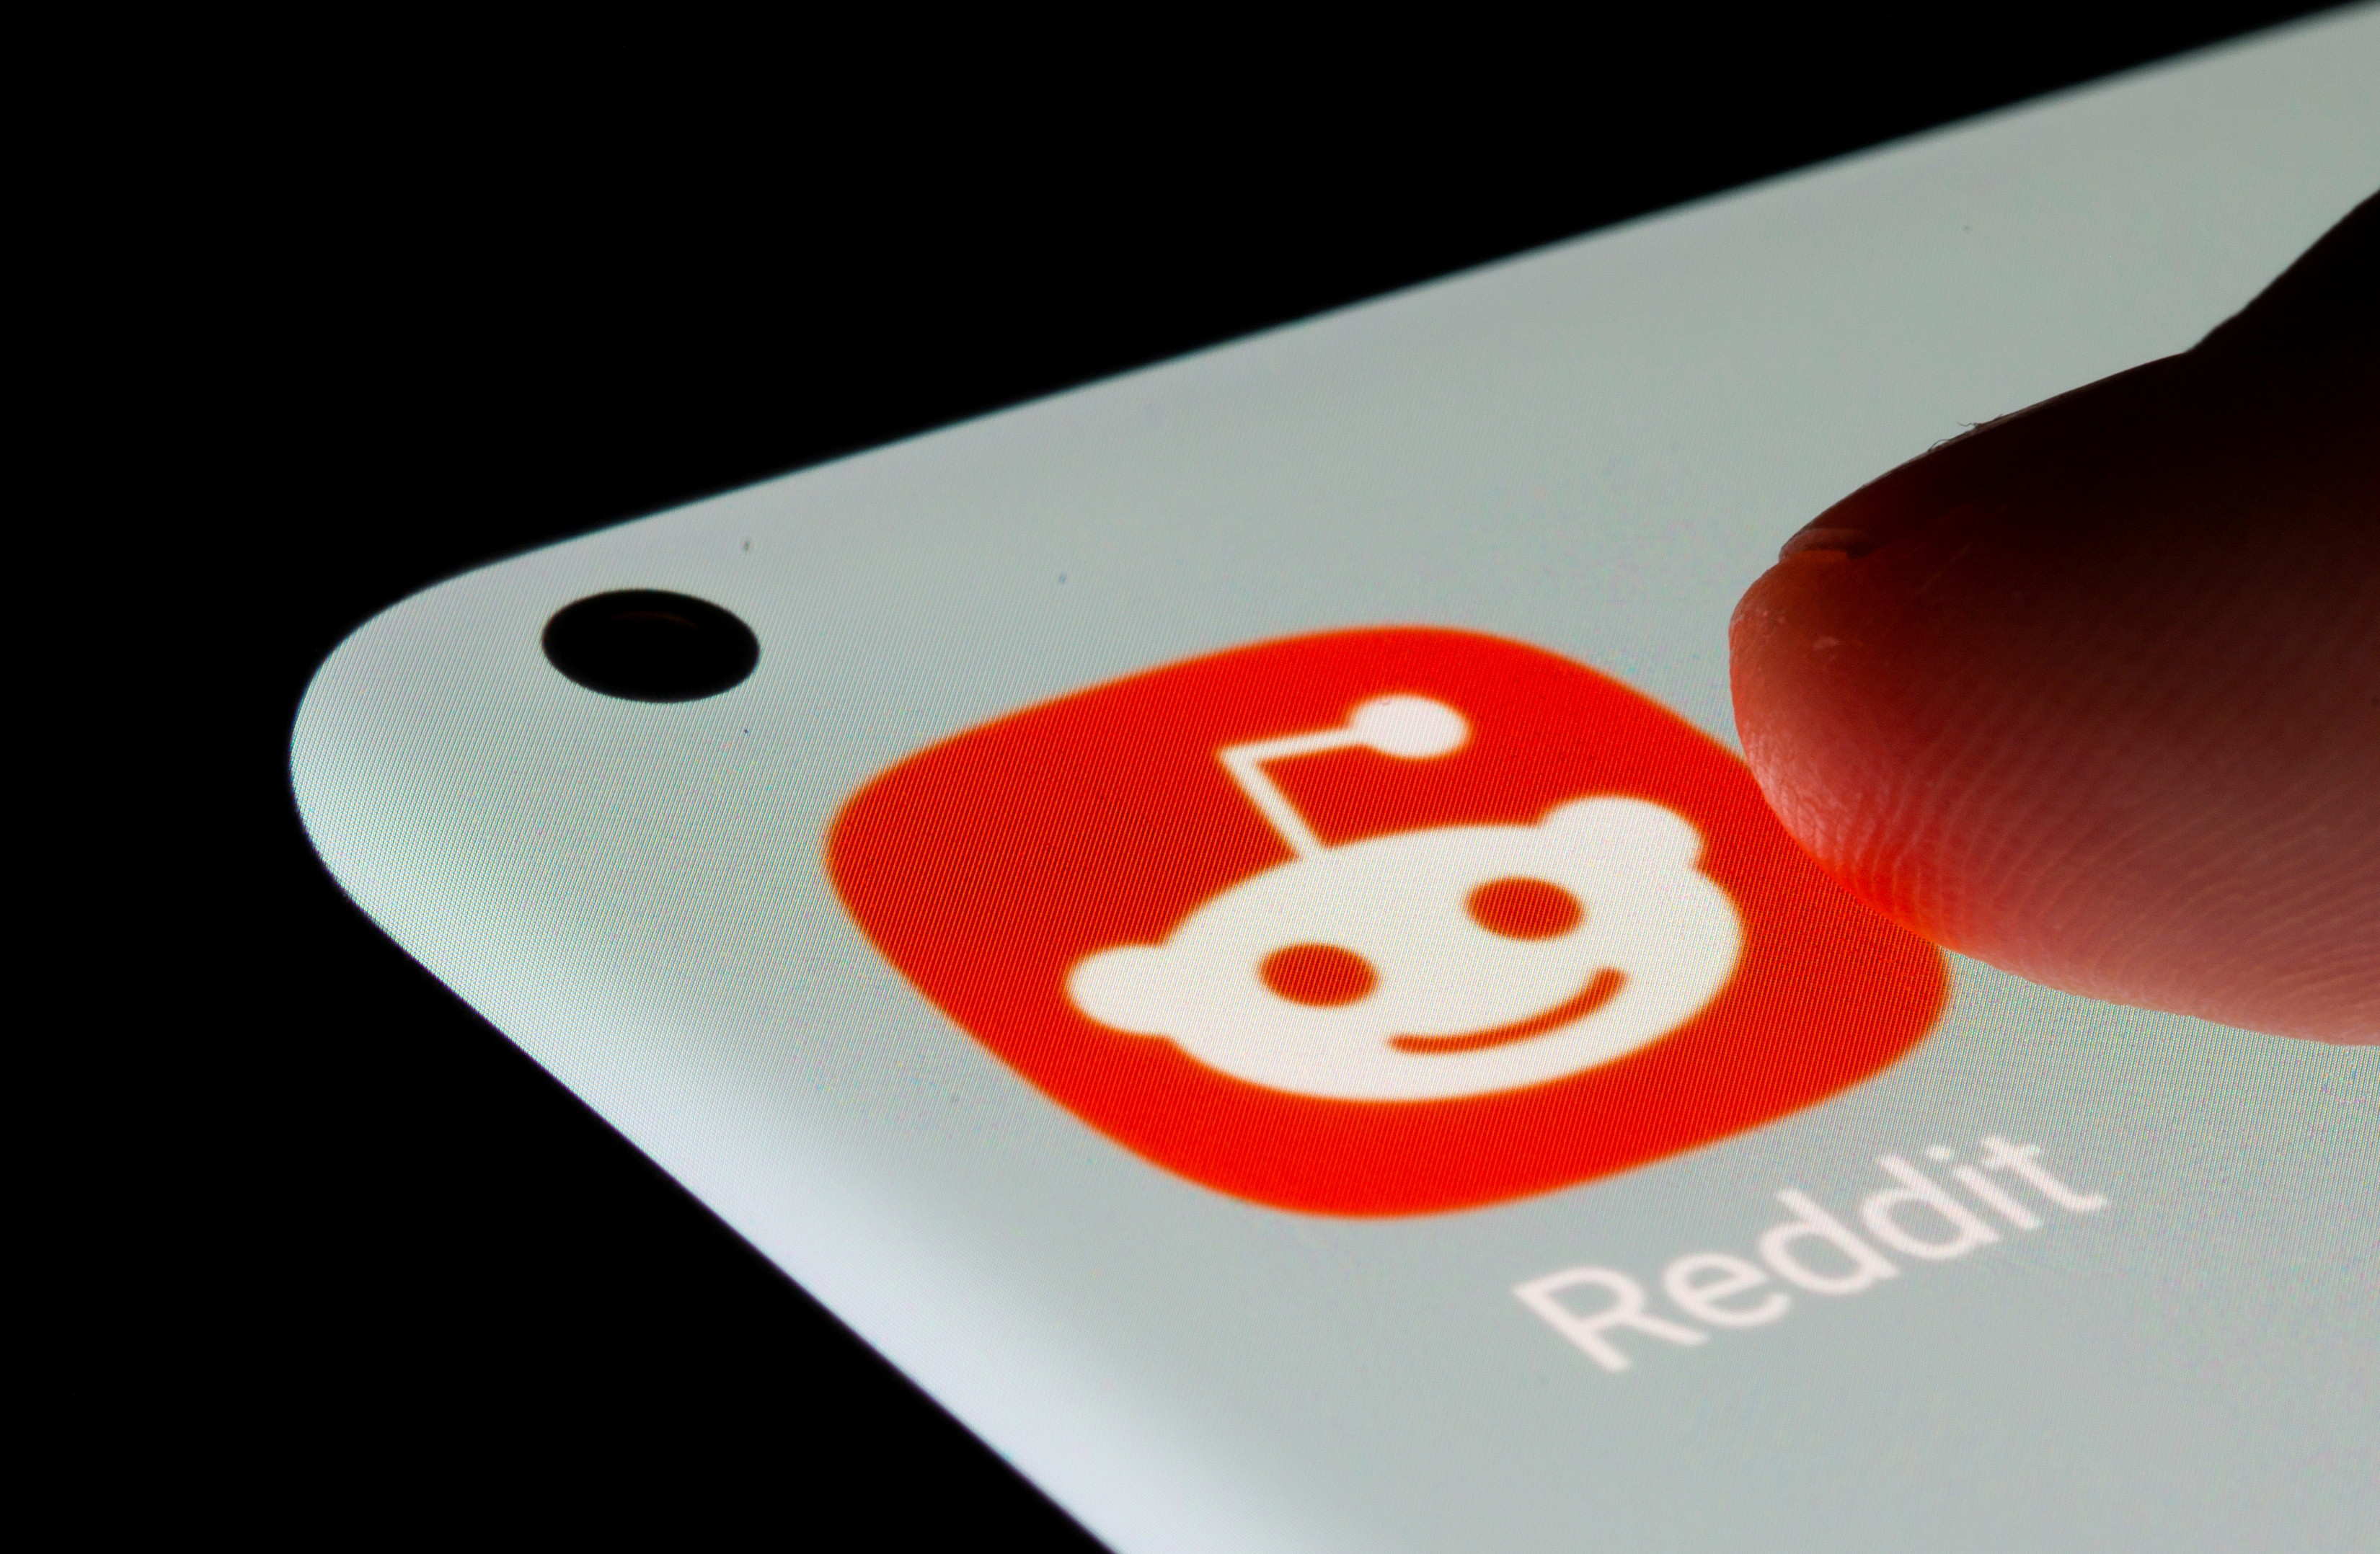 Reddit rolls out new features to improve post sharing experience